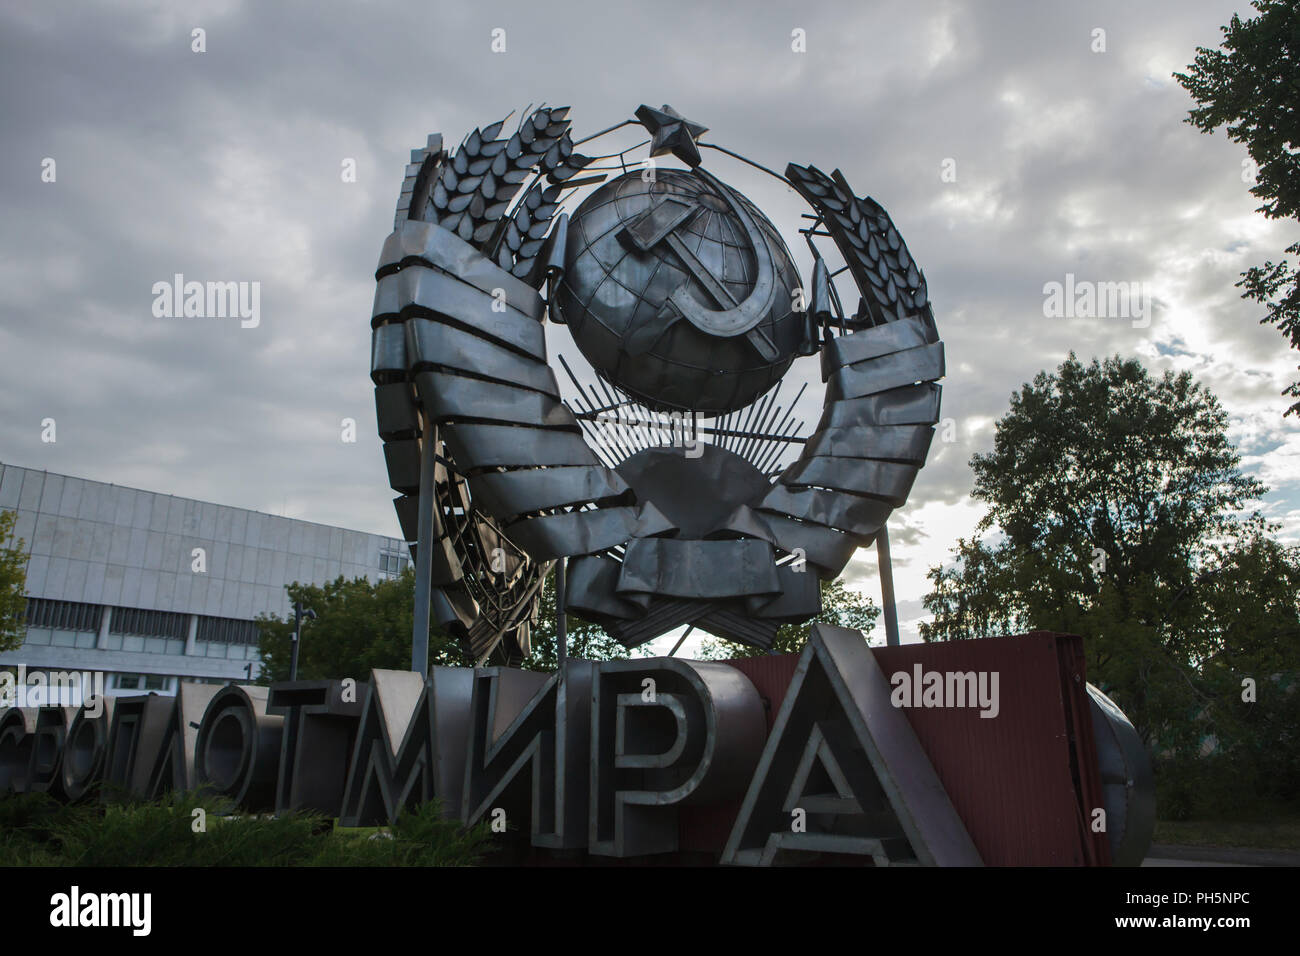 State Emblem of the Soviet Union designed by Soviet sculptor Stepan Schekotikhin on display in the Muzeon Fallen Monument Park in Moscow, Russia. The huge stainless state emblem was previously instated in Leninsky Avenue in Moscow. The inscription in Russian under the state emblem means: USSR is the Stronghold of the Peace. Stock Photo